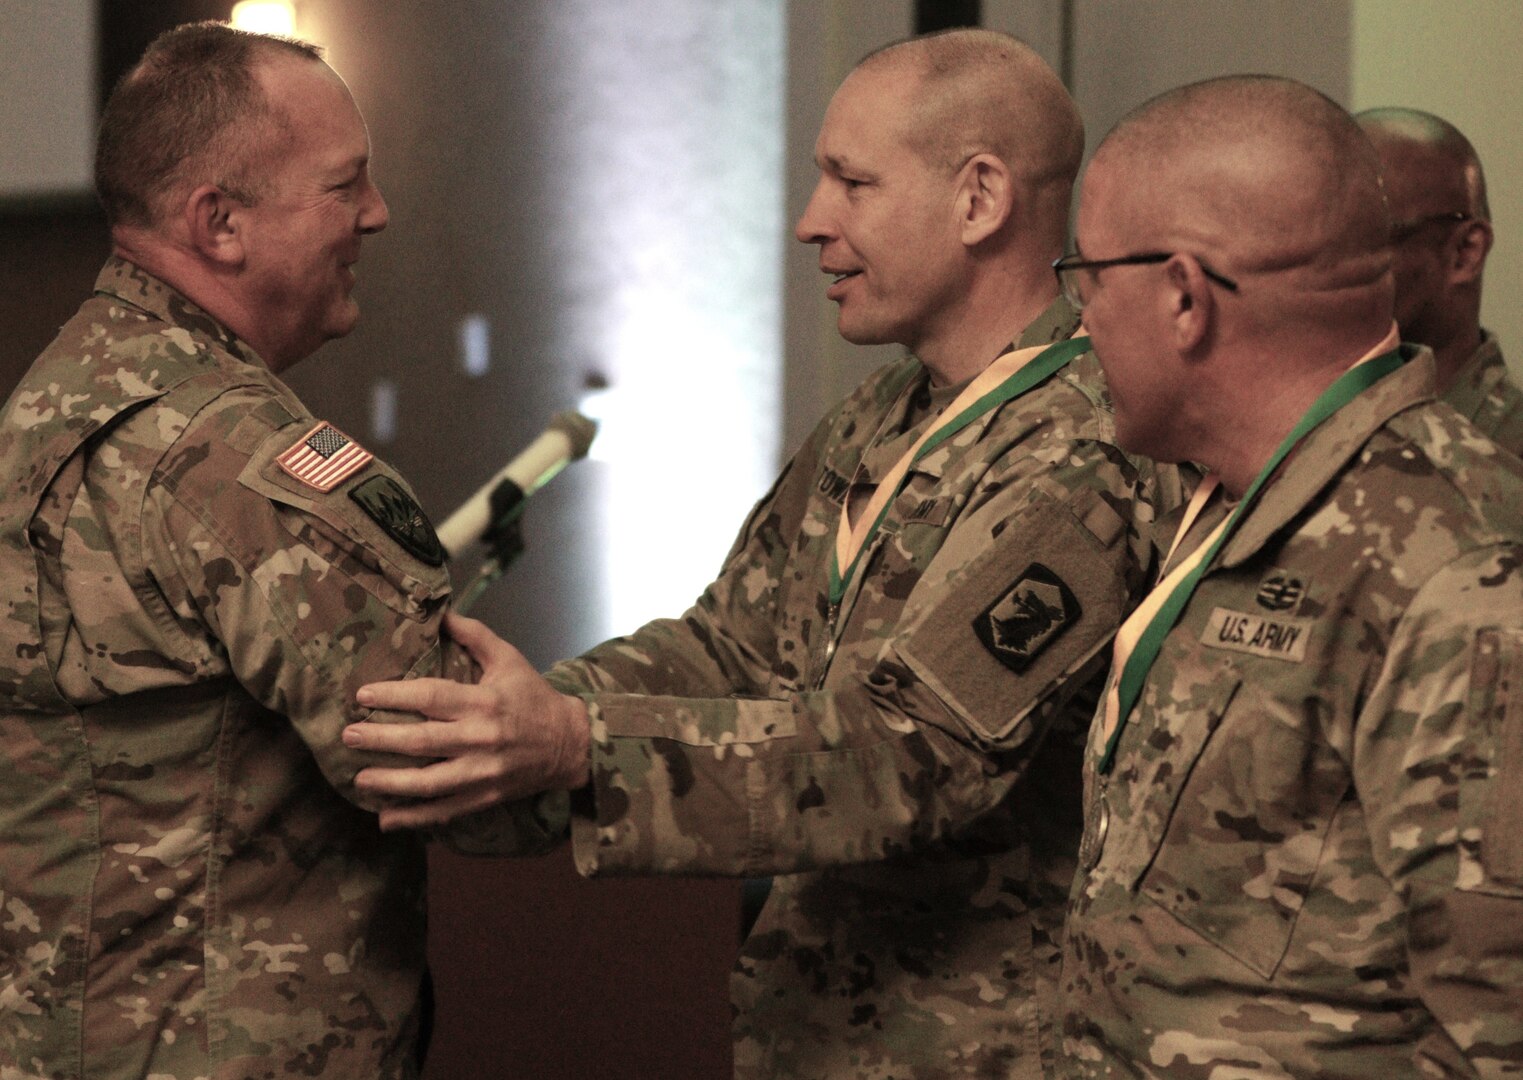 Col. Ron Bonesz, the Illinois Army National Guard's Director of Personnel (G-1) congratulates Col. Justin Towell, Commander of the 404th Maneuver Enhancement Brigade, after presenting him with the Military Police Regimental Association’s Order of the Marechaussee.